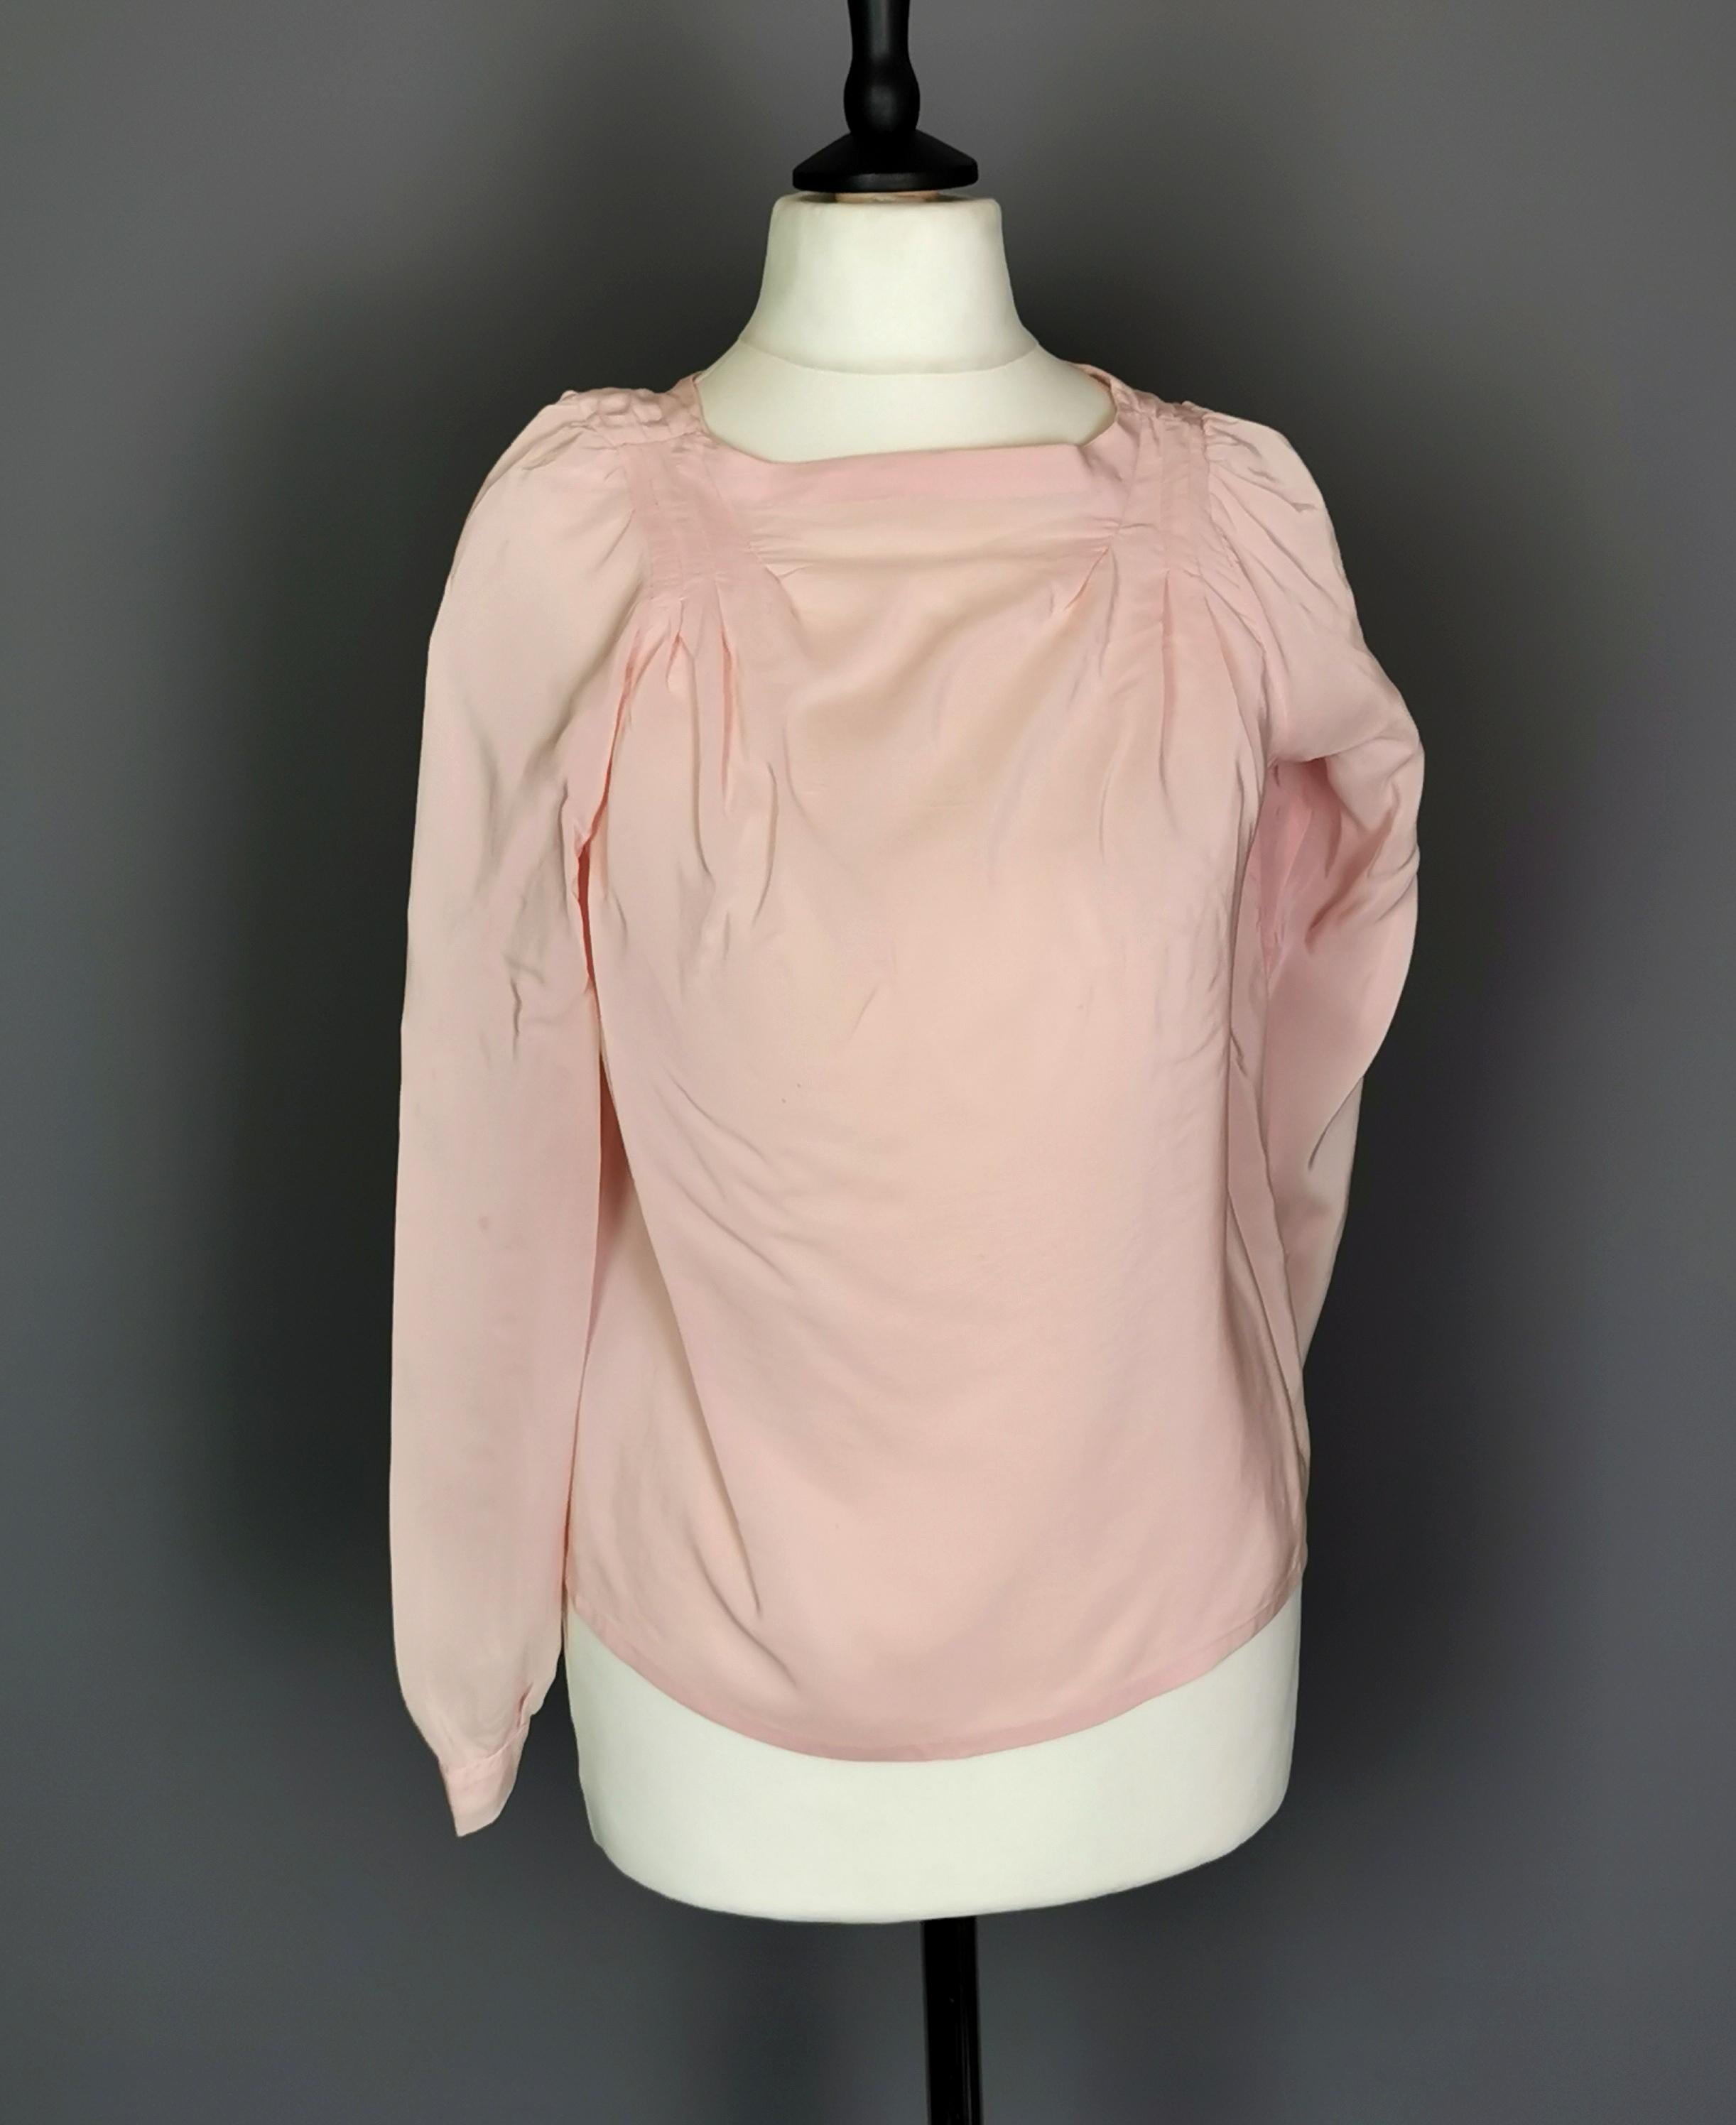 A gorgeous vintage 1930's rosebud pink silk blouse.

This is such a pretty and feminine blouse, it has slightly ruched shoulders with a pin tuck design near the shoulders and running down to the pits.

It buttons up the back and has button cuffs, it